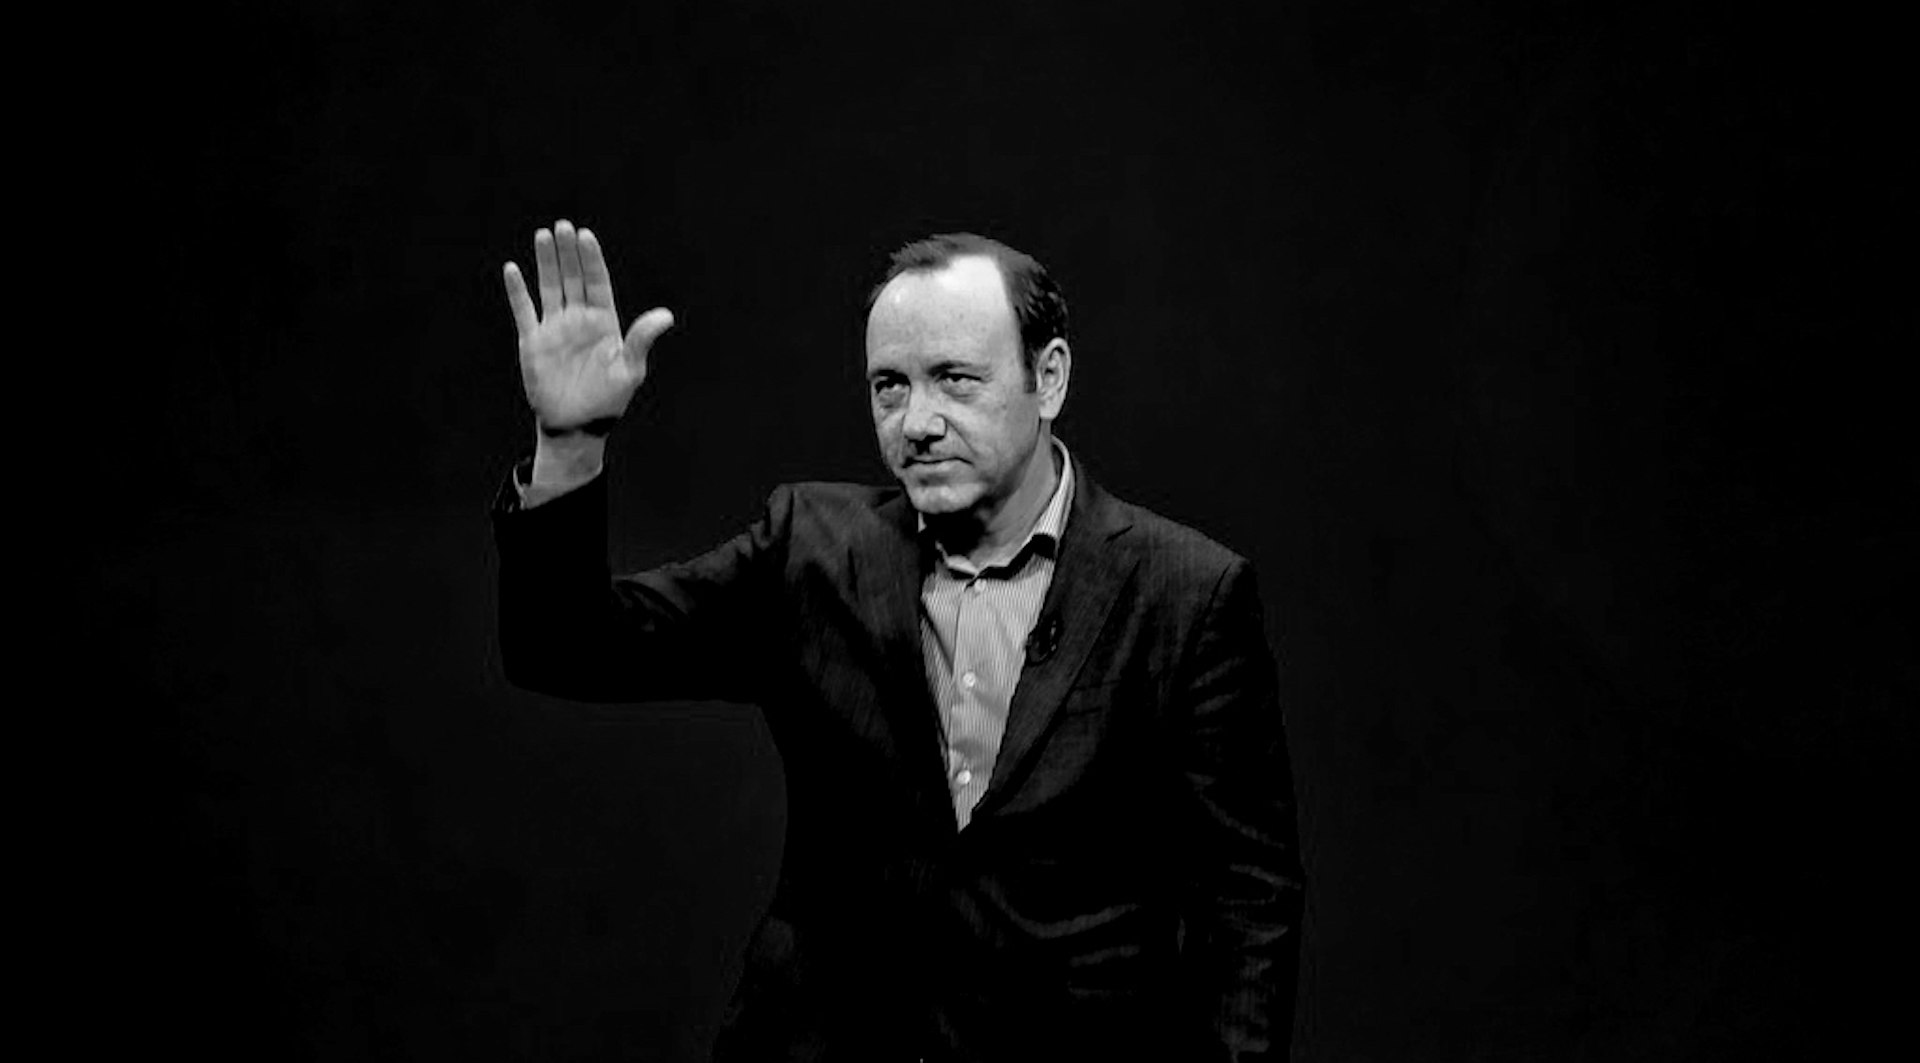 Kevin Spacey’s ‘apology’ for allegedly propositioning a teenager is insulting